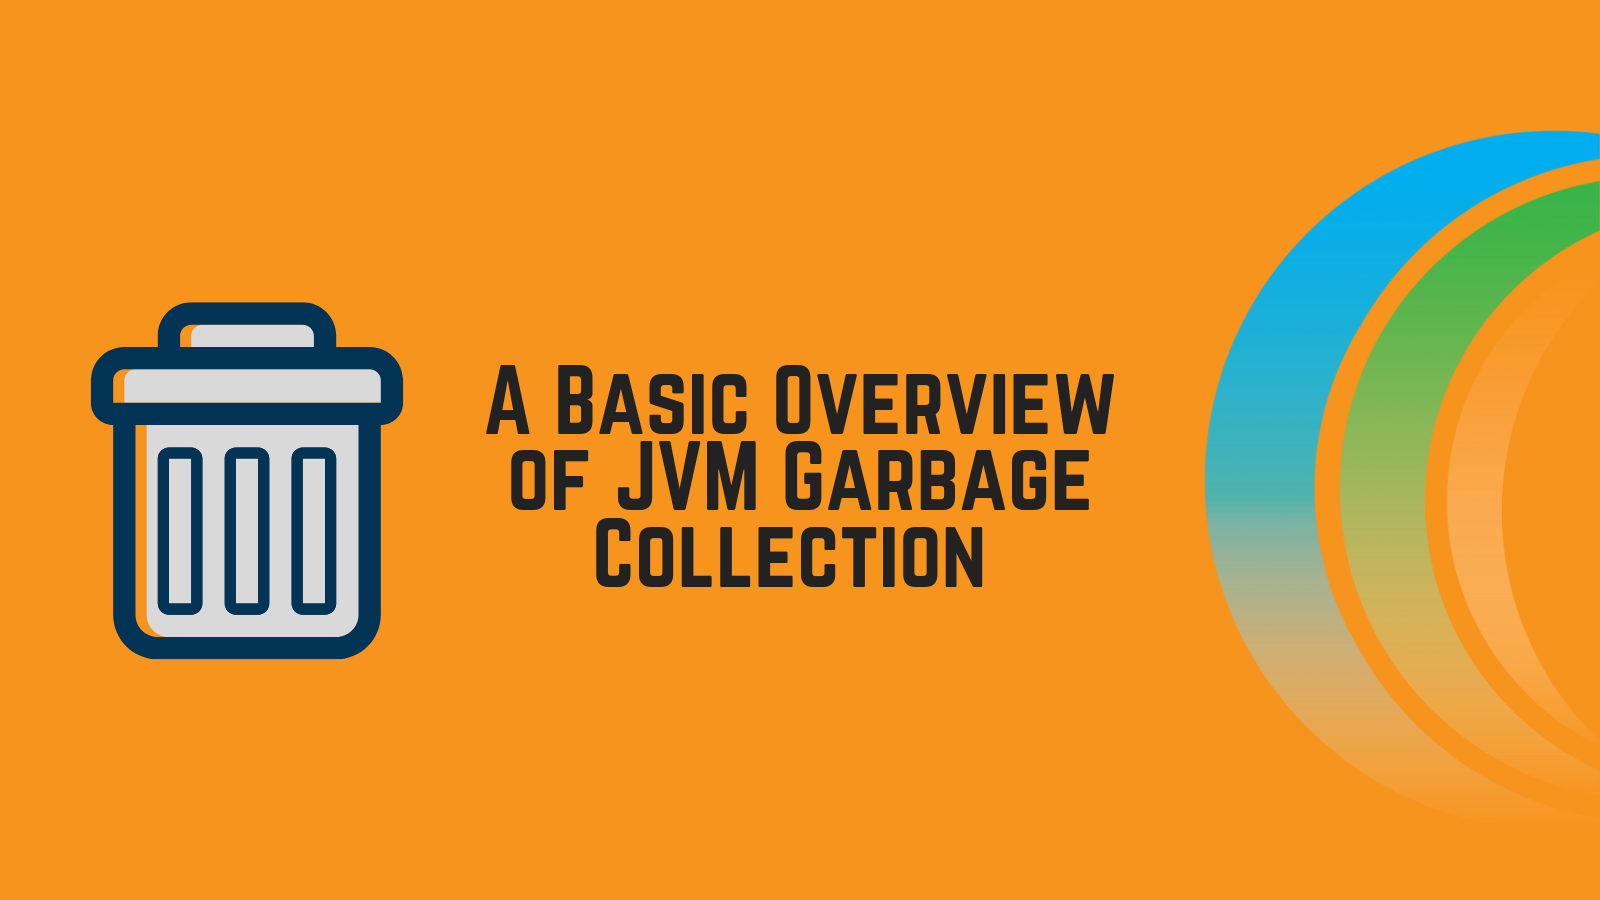 A Basic Overview of JVM Garbage Collection